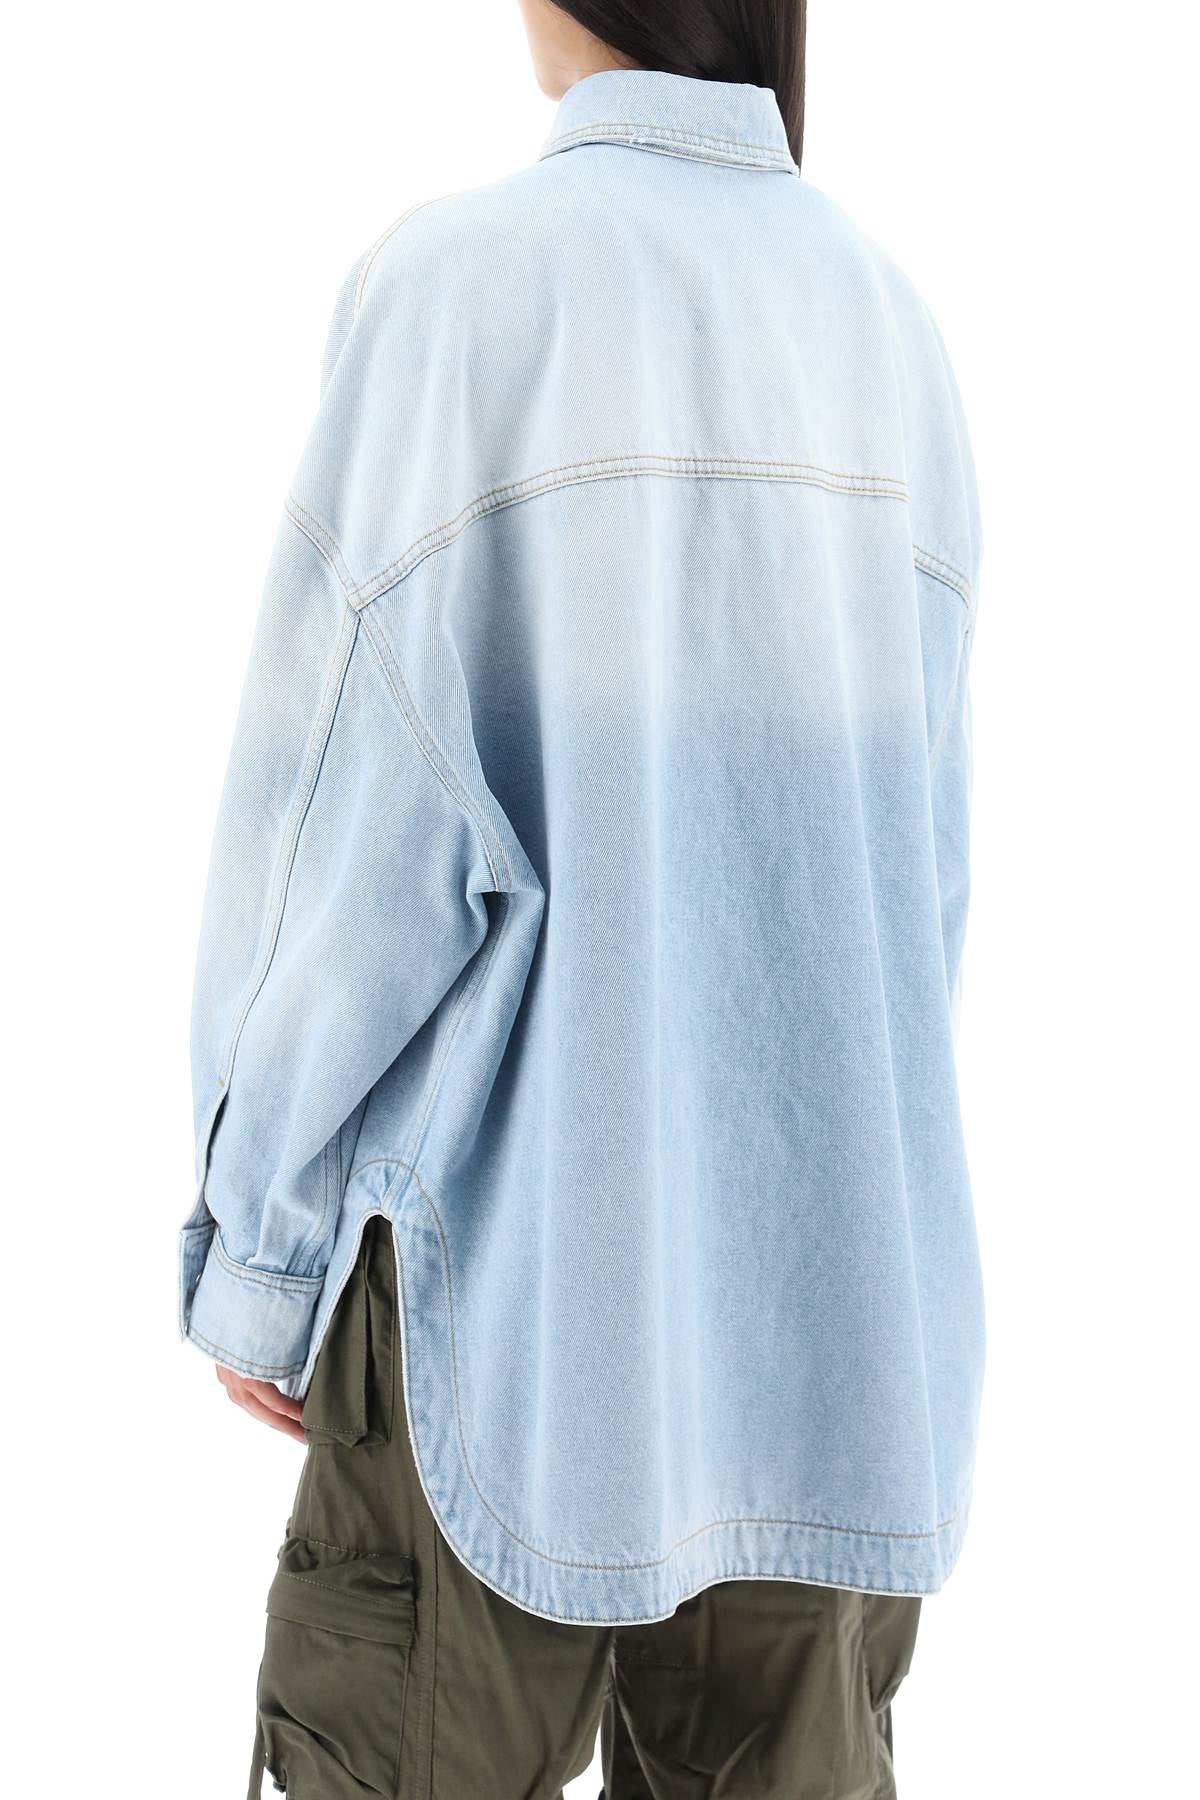 Stylish Light Blue Denim Outerwear for Women - FW23 Collection